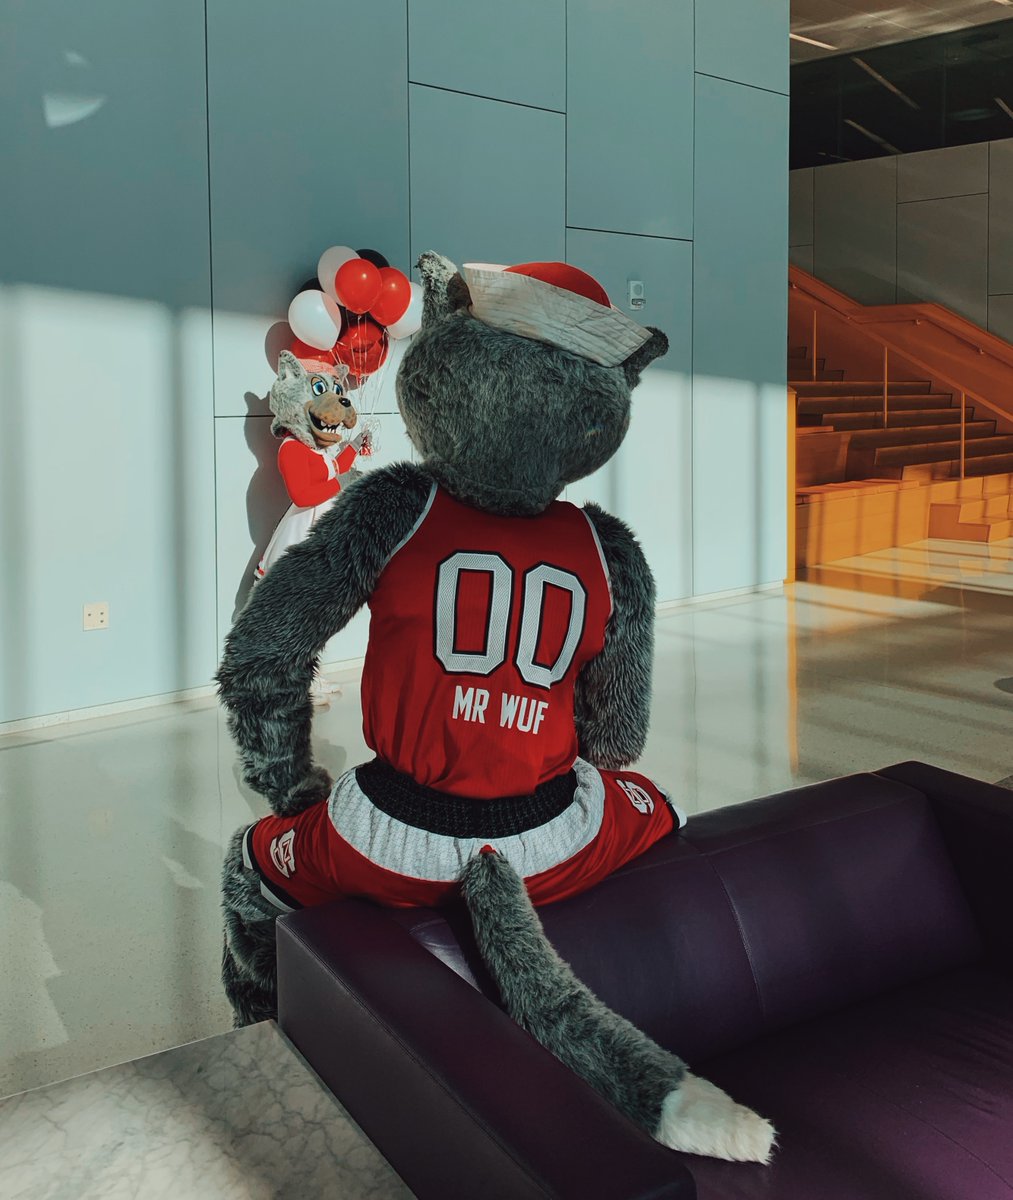 Get you someone who looks at you the way Mr. Wuf looks at Ms. Wuf. 😍🐺🥰 Happy #ValentinesDay, Pack.